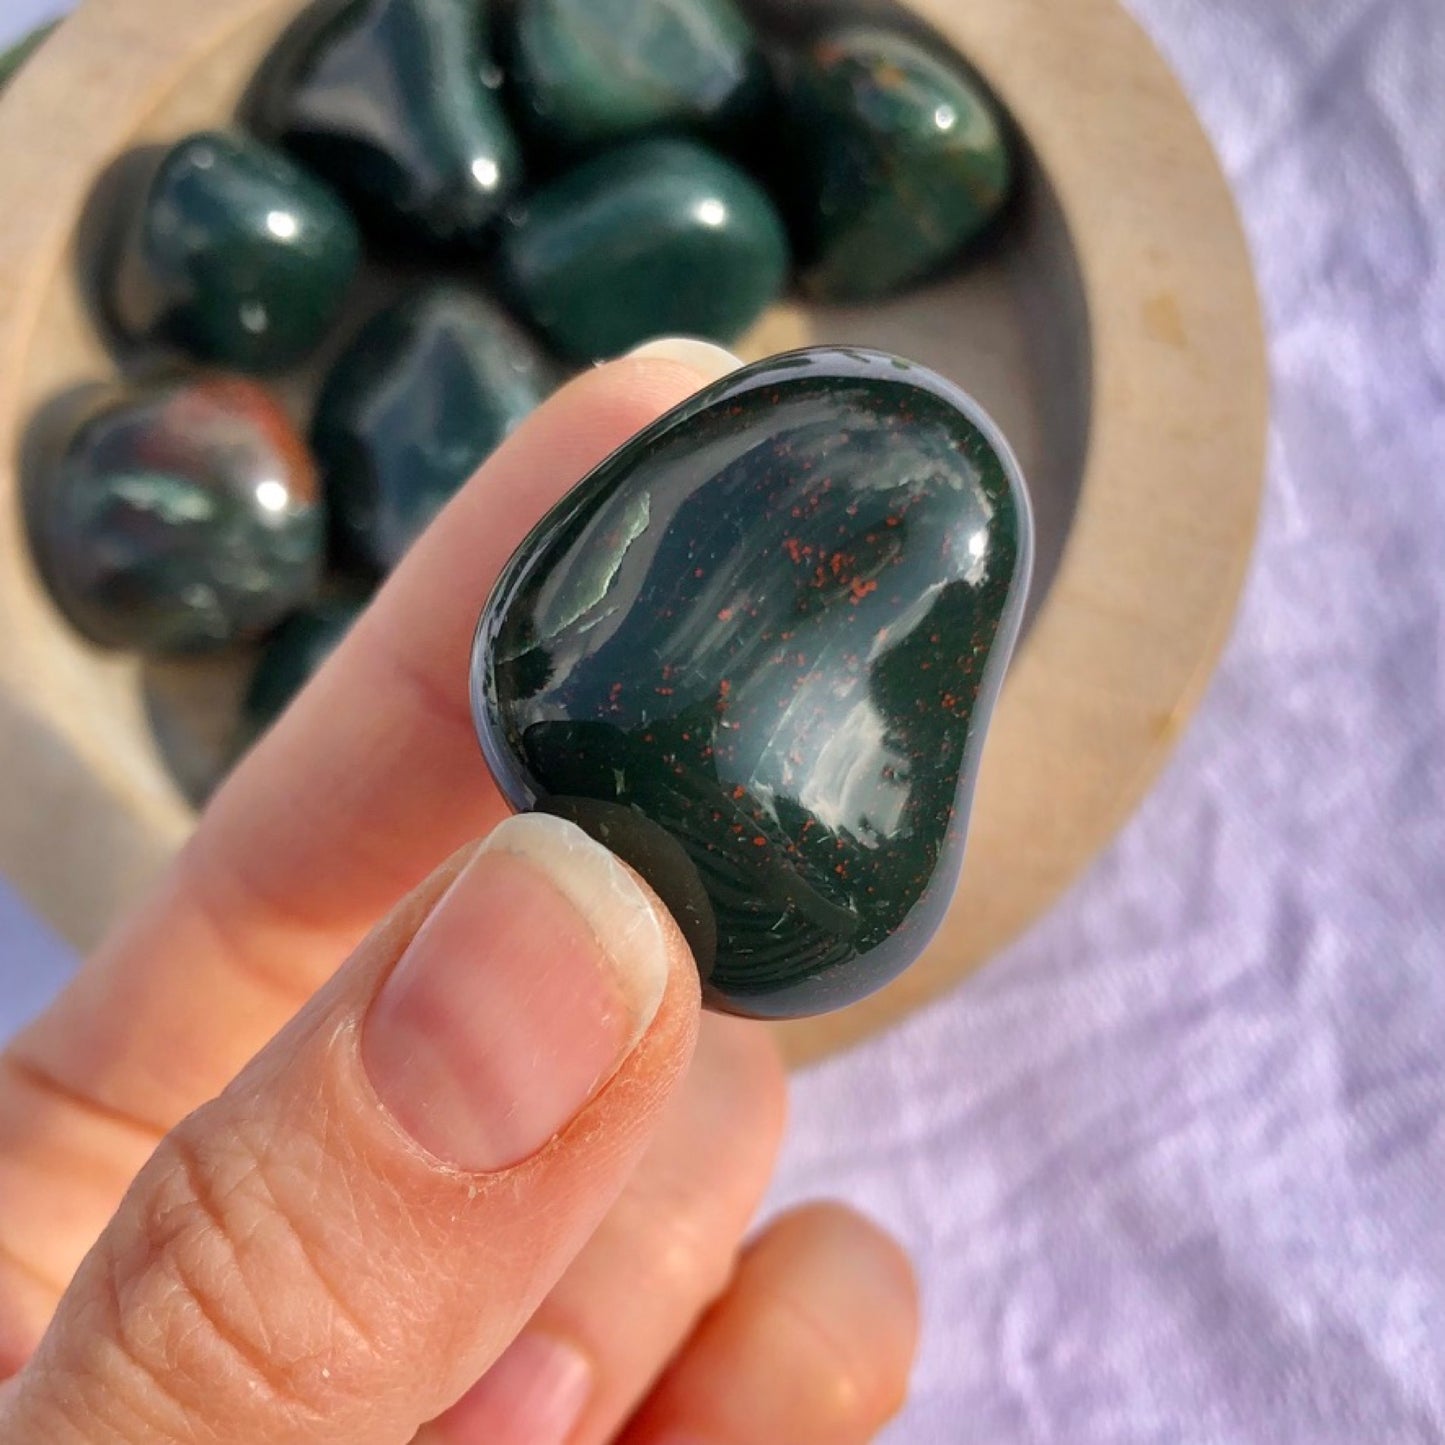 Glossy dark green and red flecked bloodstone pebble held to camera